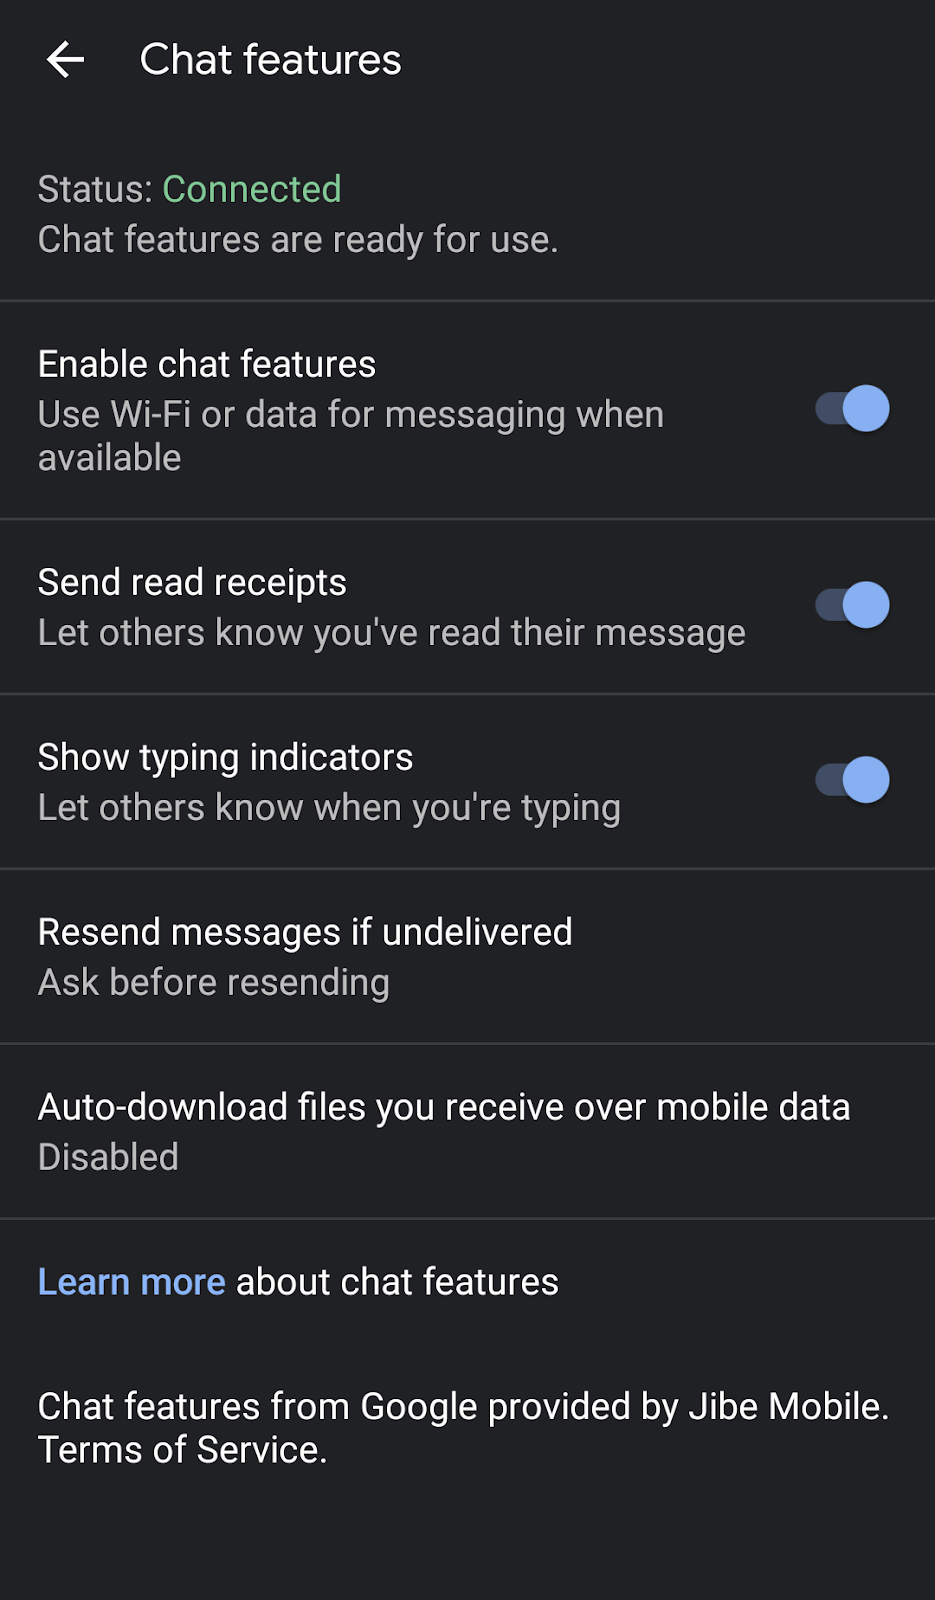 RCS chat features settings available in Google Messages